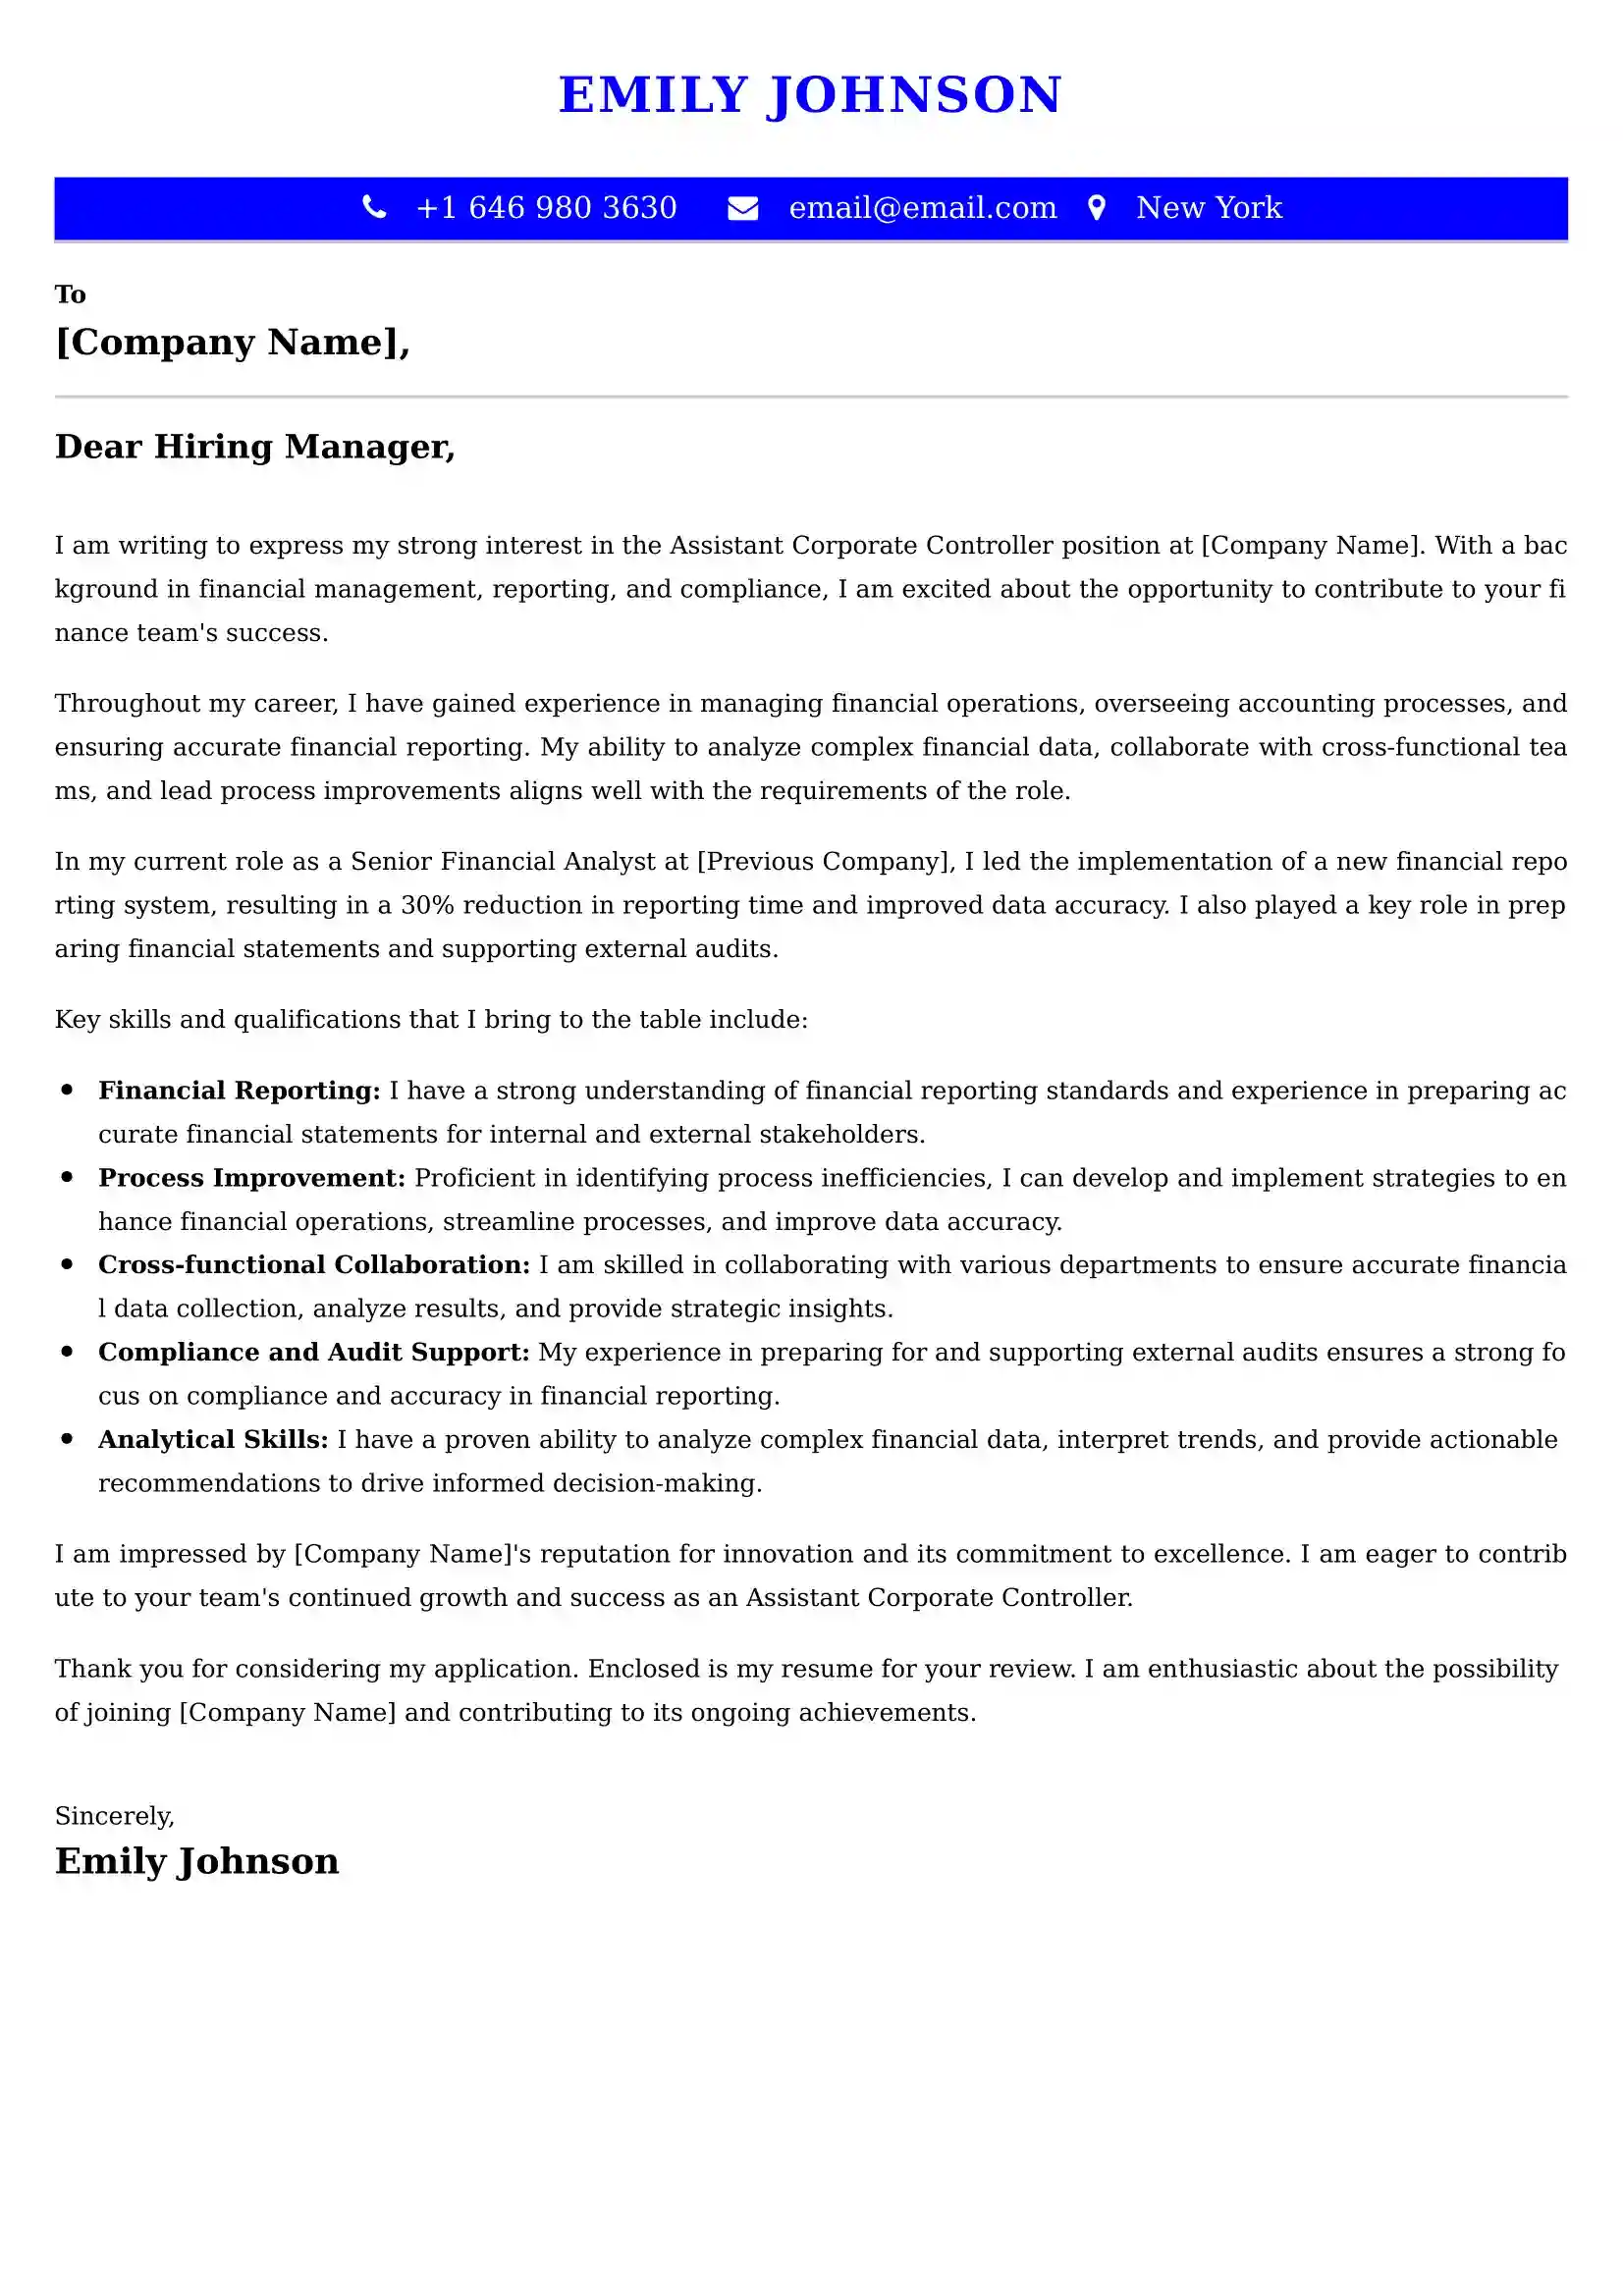 Assistant Corporate Controller Cover Letter Examples Australia